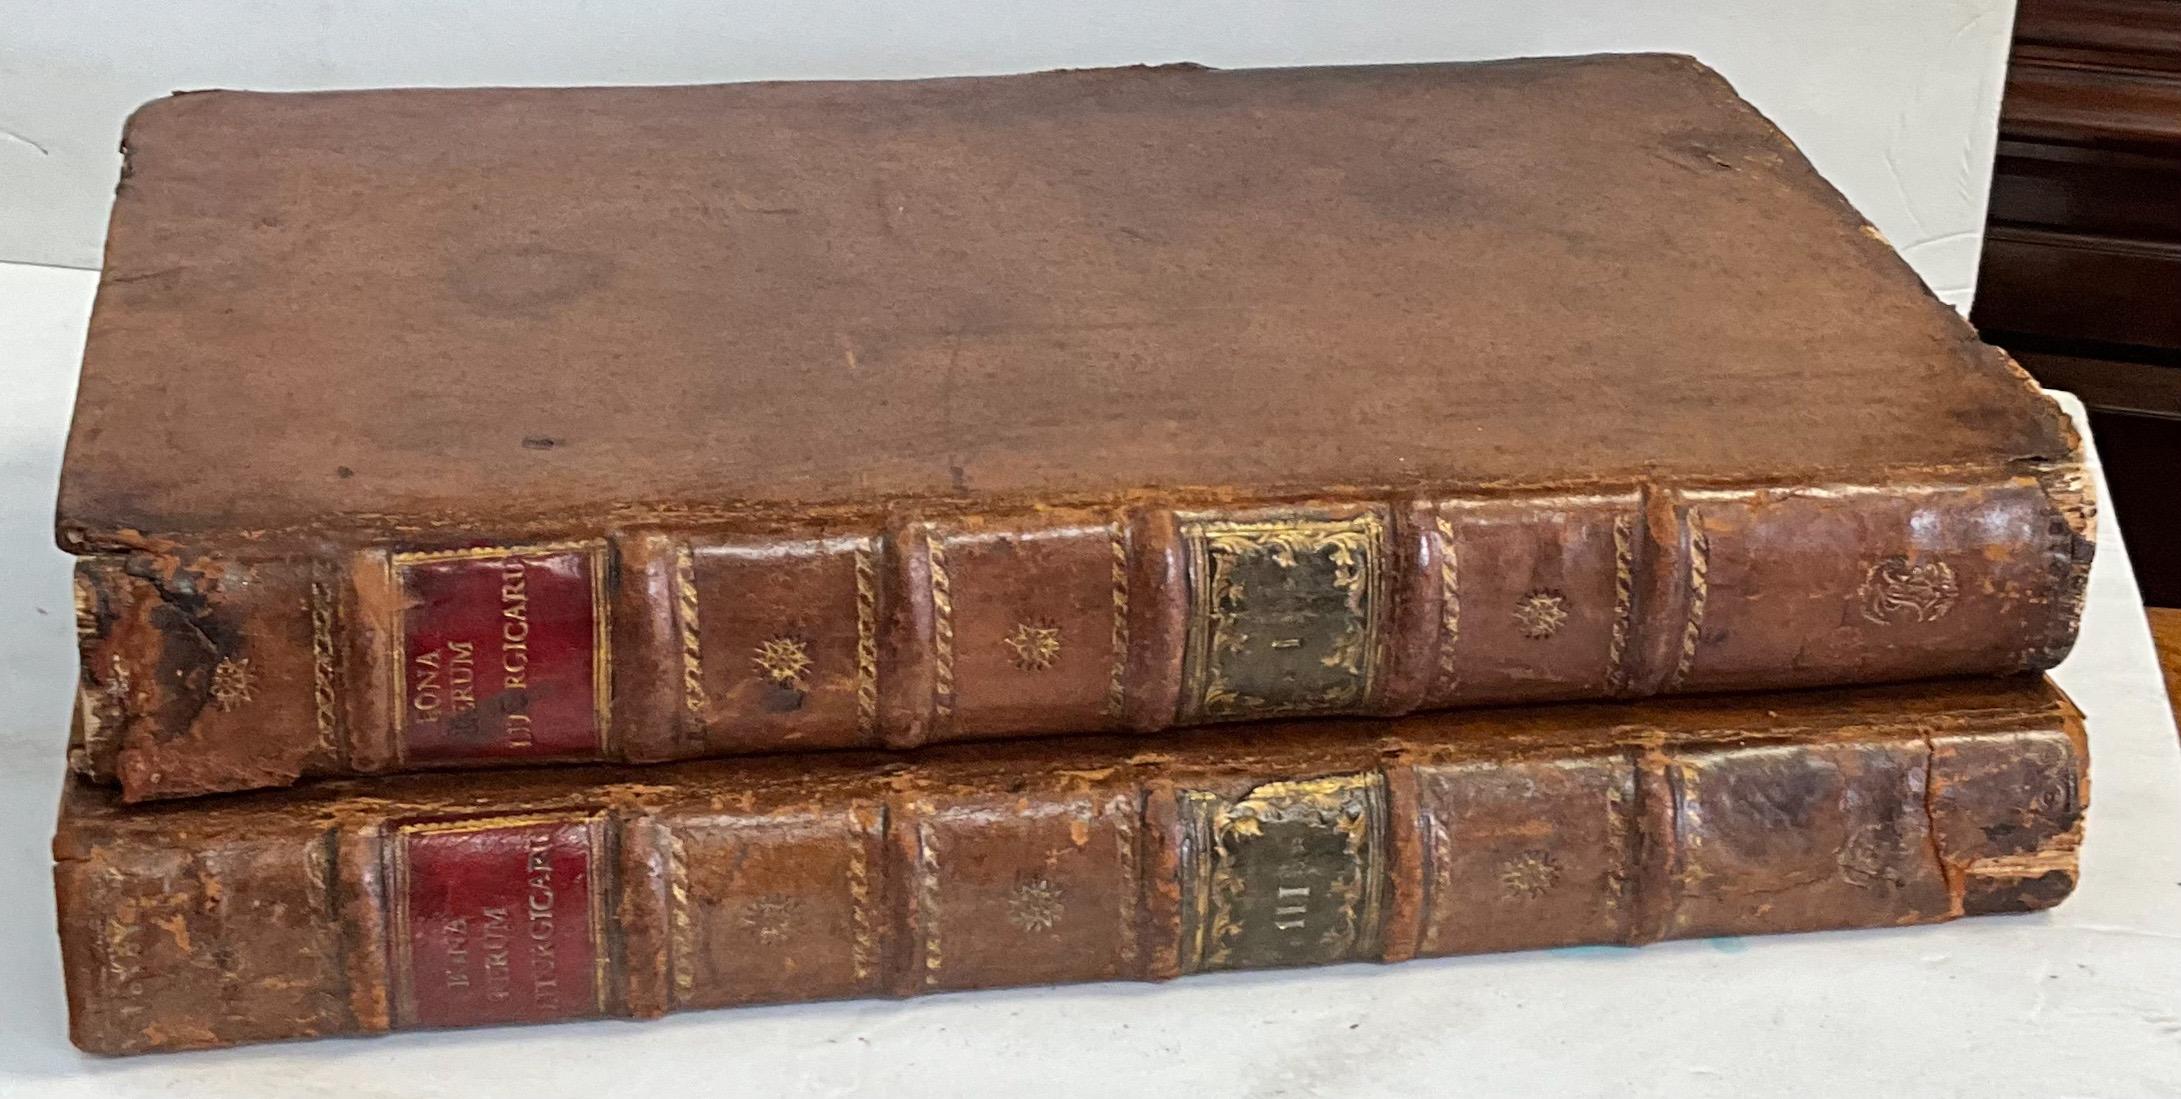 These are a wonderful addition to a library or study! The two books date to 1777 or the era of George III. At first glance, I thought they were Italian, but upon further study, they appear to be in Latin and some sort of religious guidelines. They